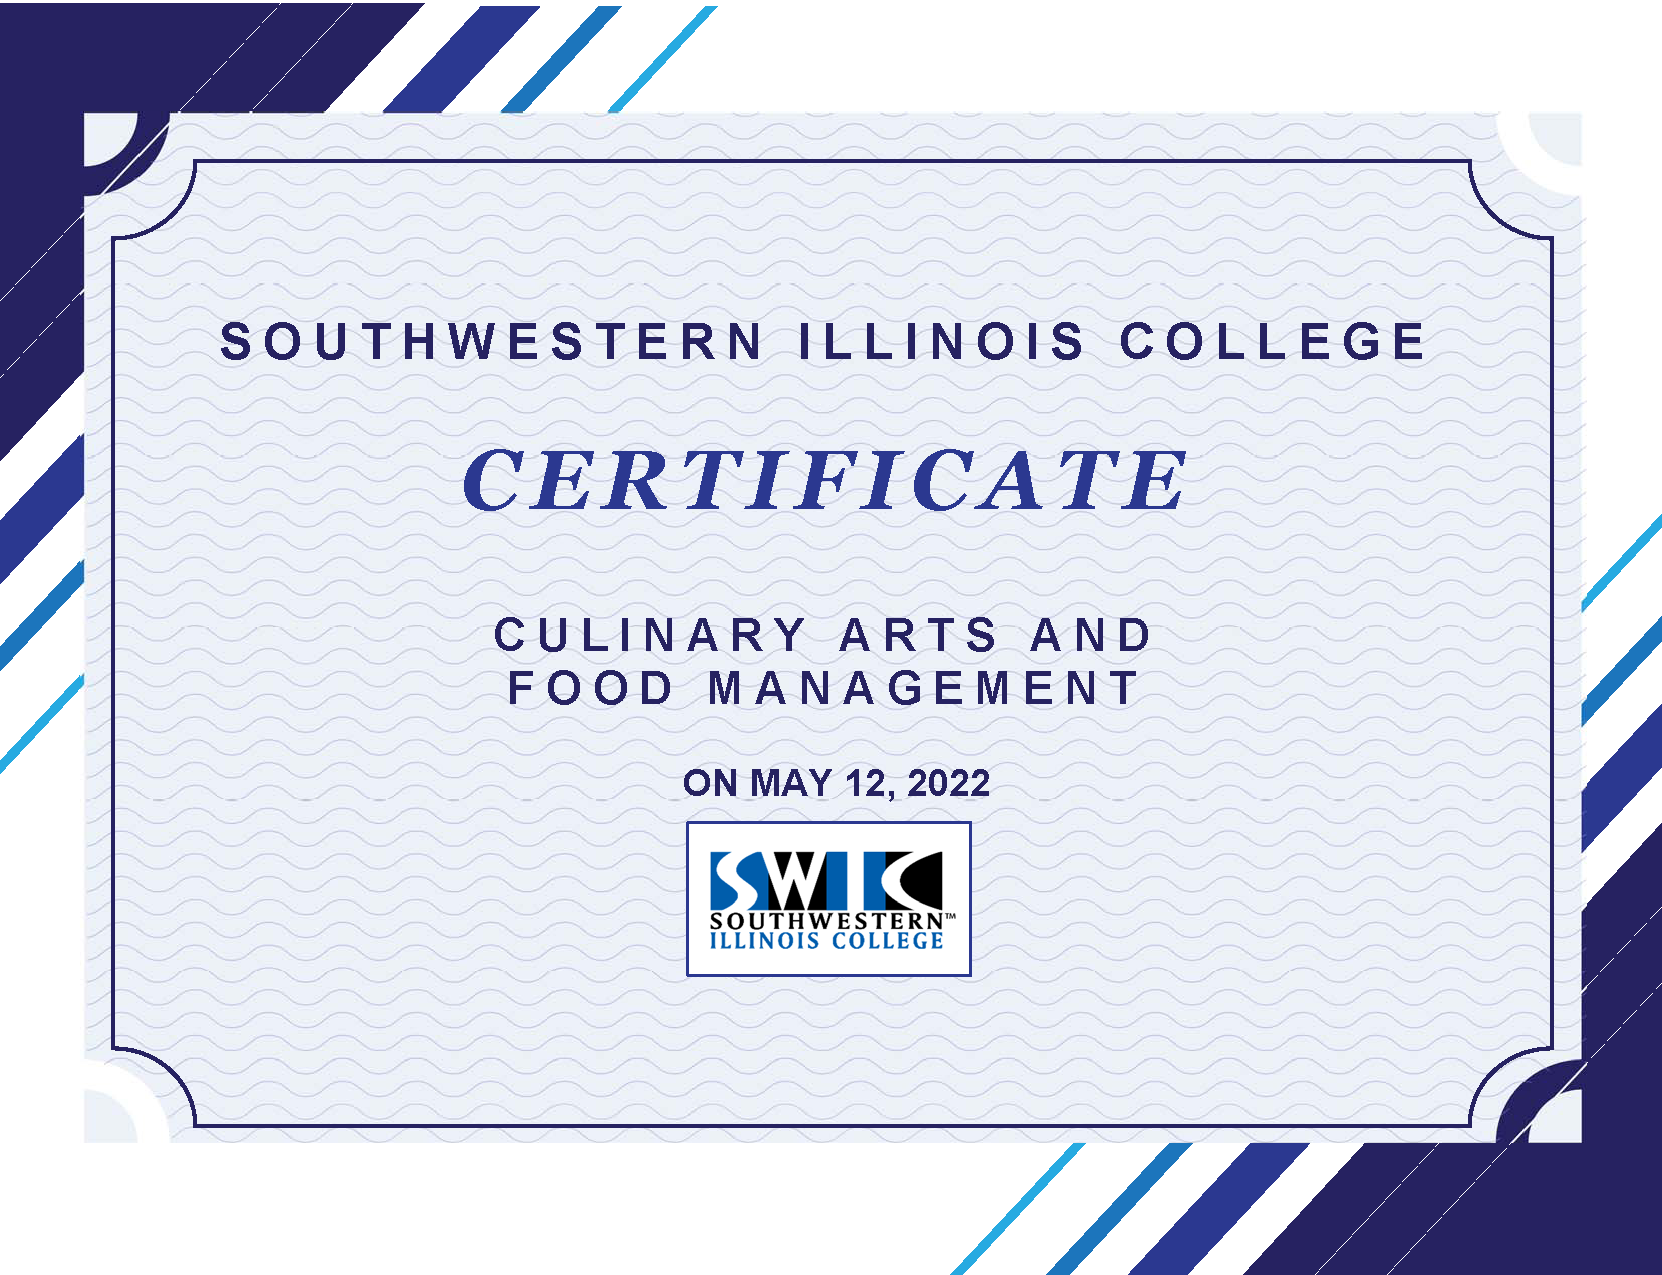 Southwestern Illinois College Certificate Culinary Arts And Food Management